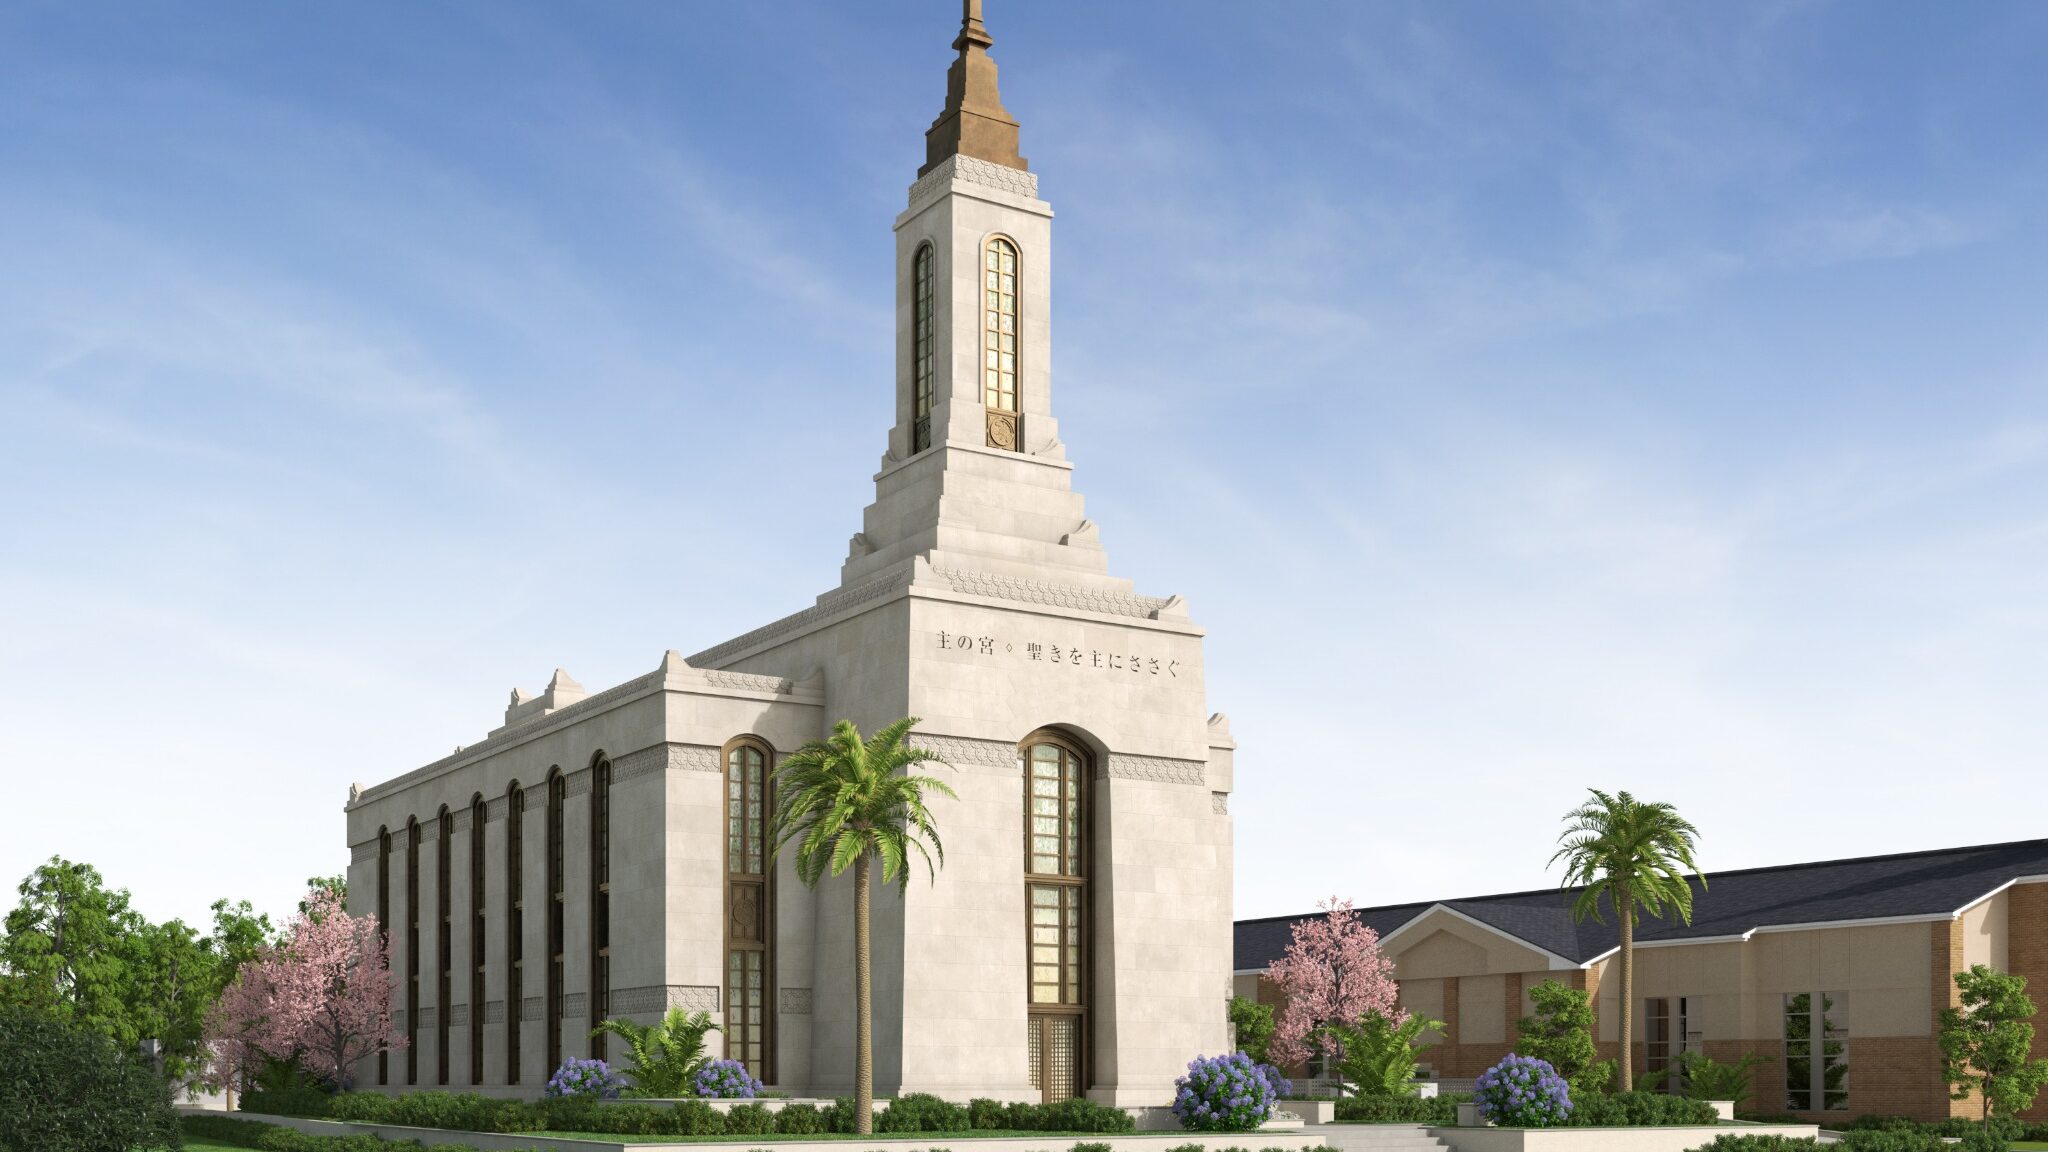 A rendering of the Okinawa, Japan Temple. Photo credit: The Church of Jesus Christ of Latter-day Sa...